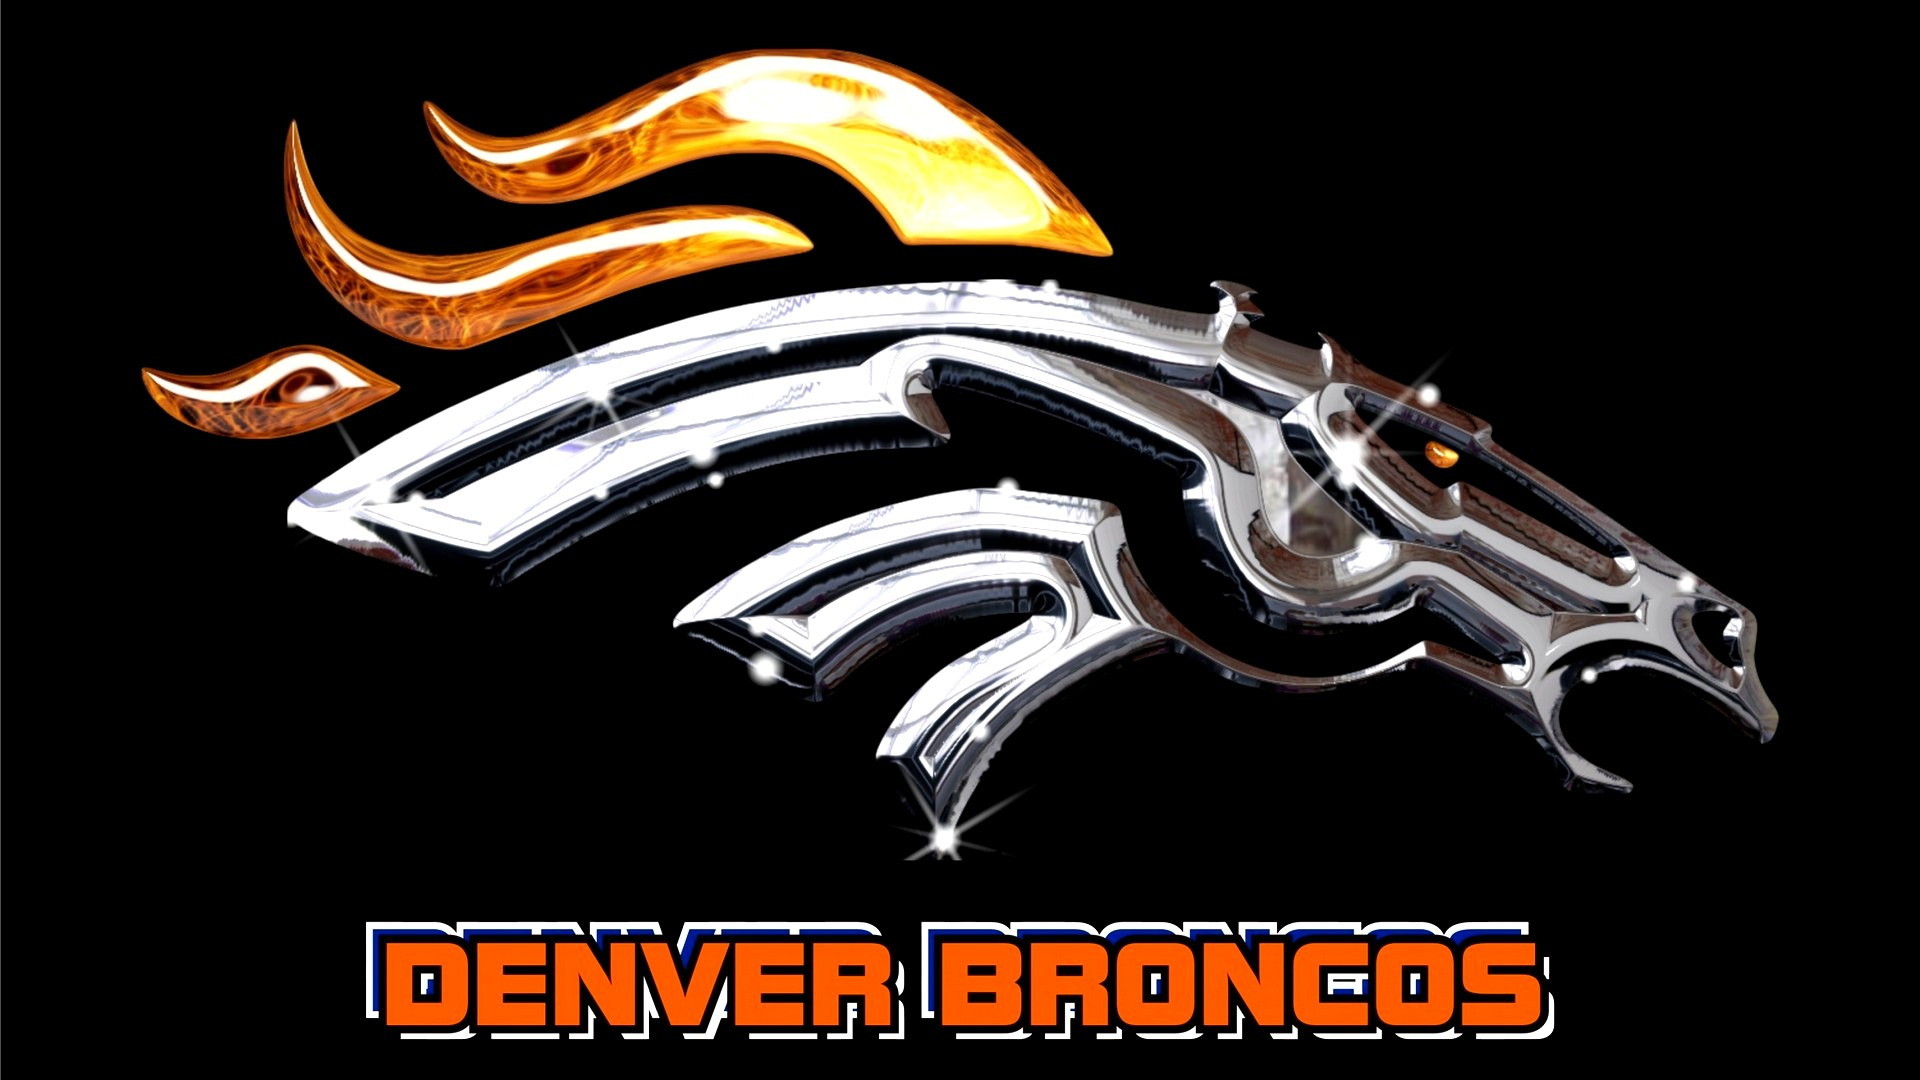 Denver Broncos Wallpaper For Desktop with high-resolution 1920x1080 pixel. You can use and set as wallpaper for Notebook Screensavers, Mac Wallpapers, Mobile Home Screen, iPhone or Android Phones Lock Screen